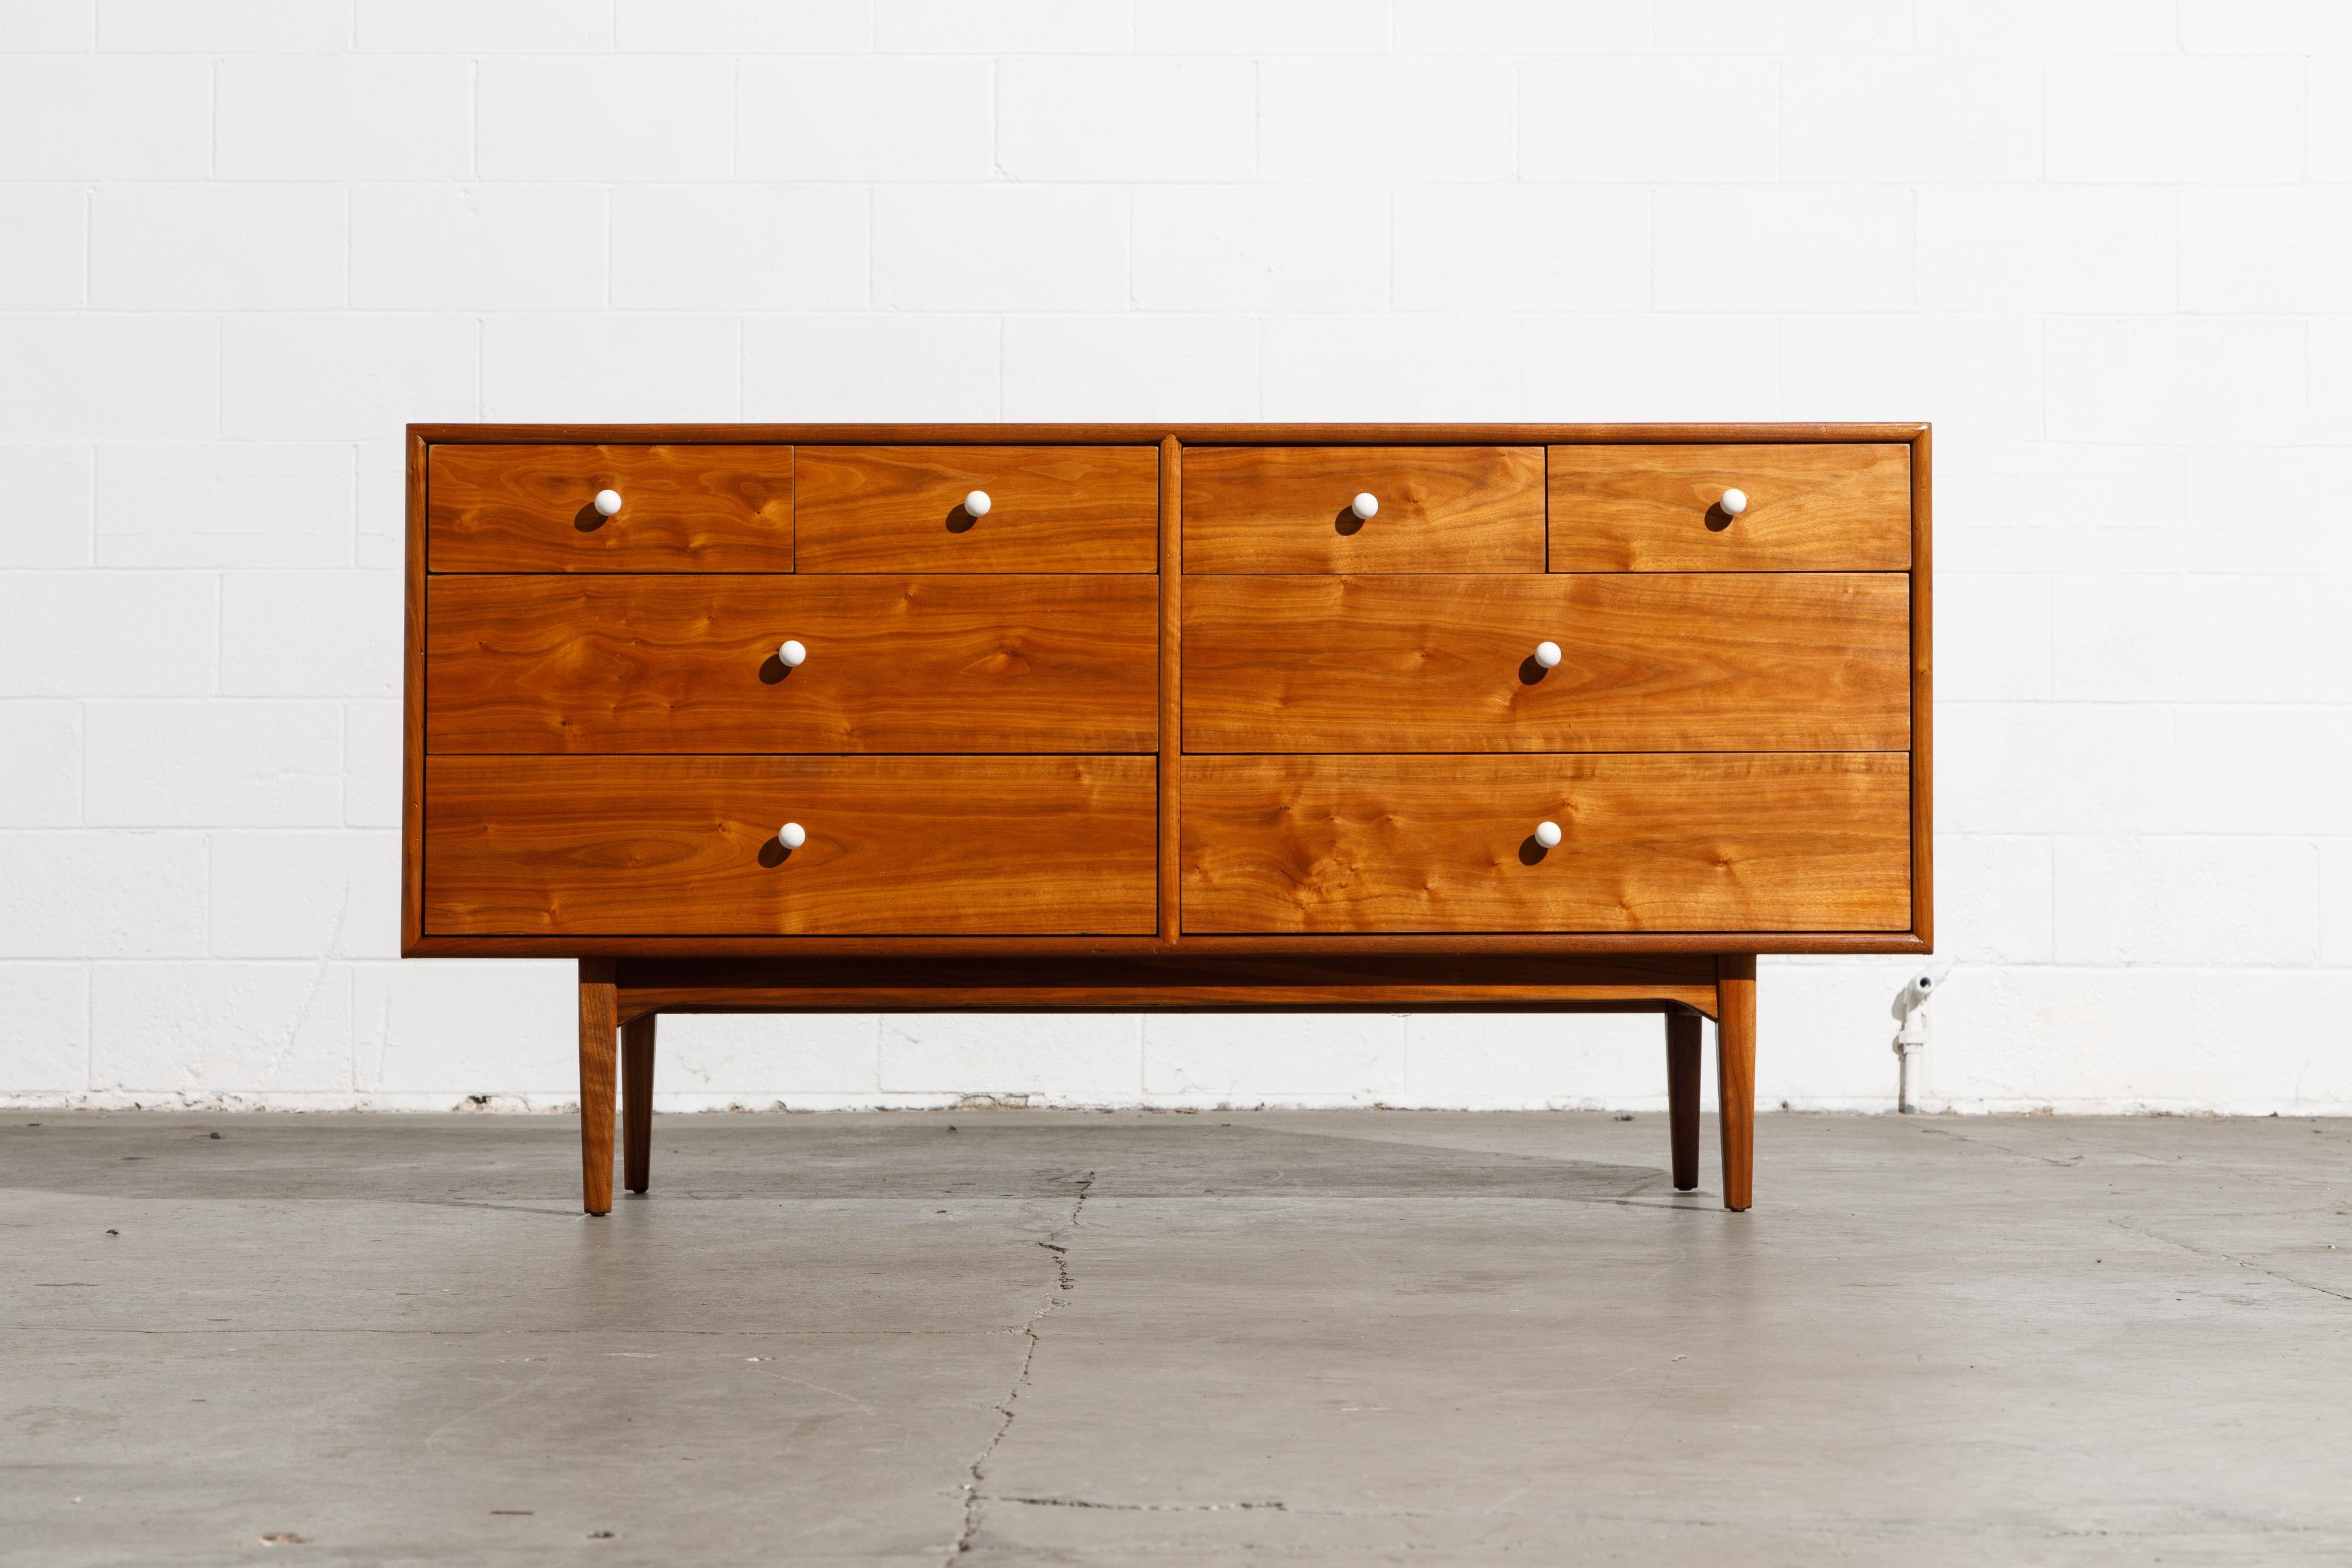 Exceptional Mid-Century Modern eight-drawer dresser and mirror, designed by Kipp Stewart and Stewart McDougall as part of the 'Declaration' line for Drexel furniture. Fabricated from walnut with striking wood grain and dovetail drawers this